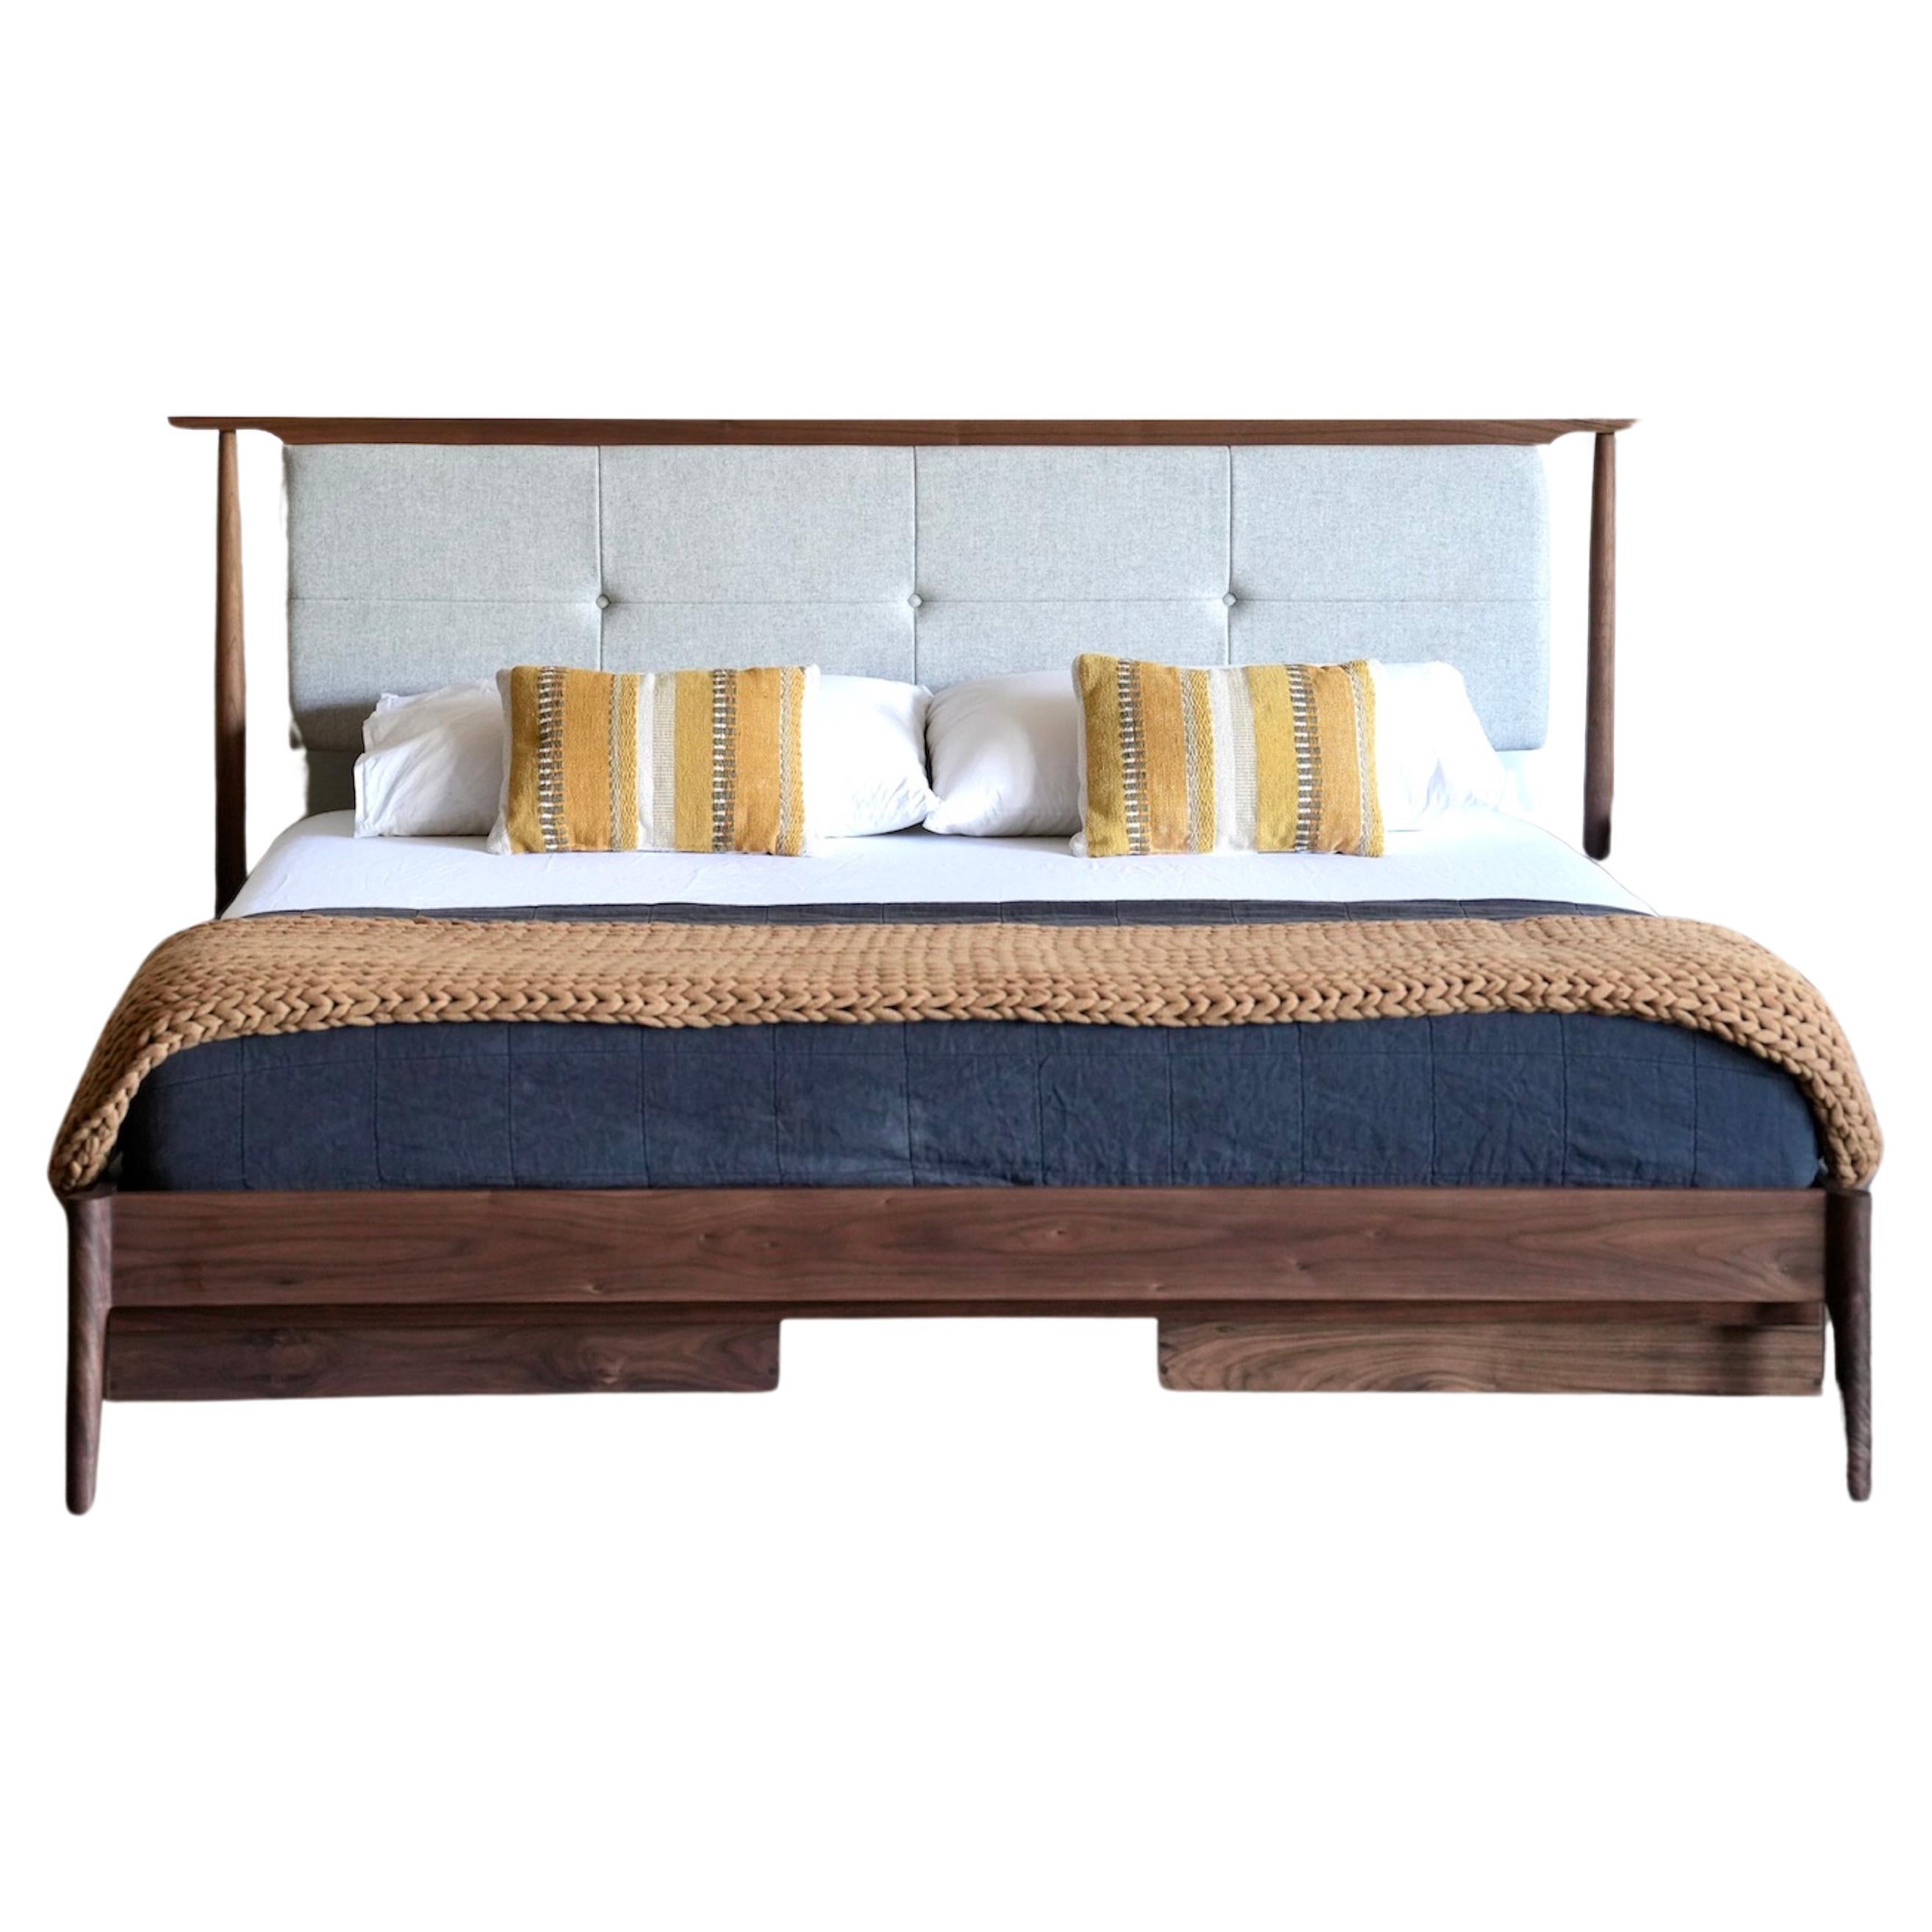 Though delicate in design, this bed is remarkably sturdy and stout. The design goal was to have a bed that is both simple in appearance and that gives a strong presence. To have the headboard extend 6